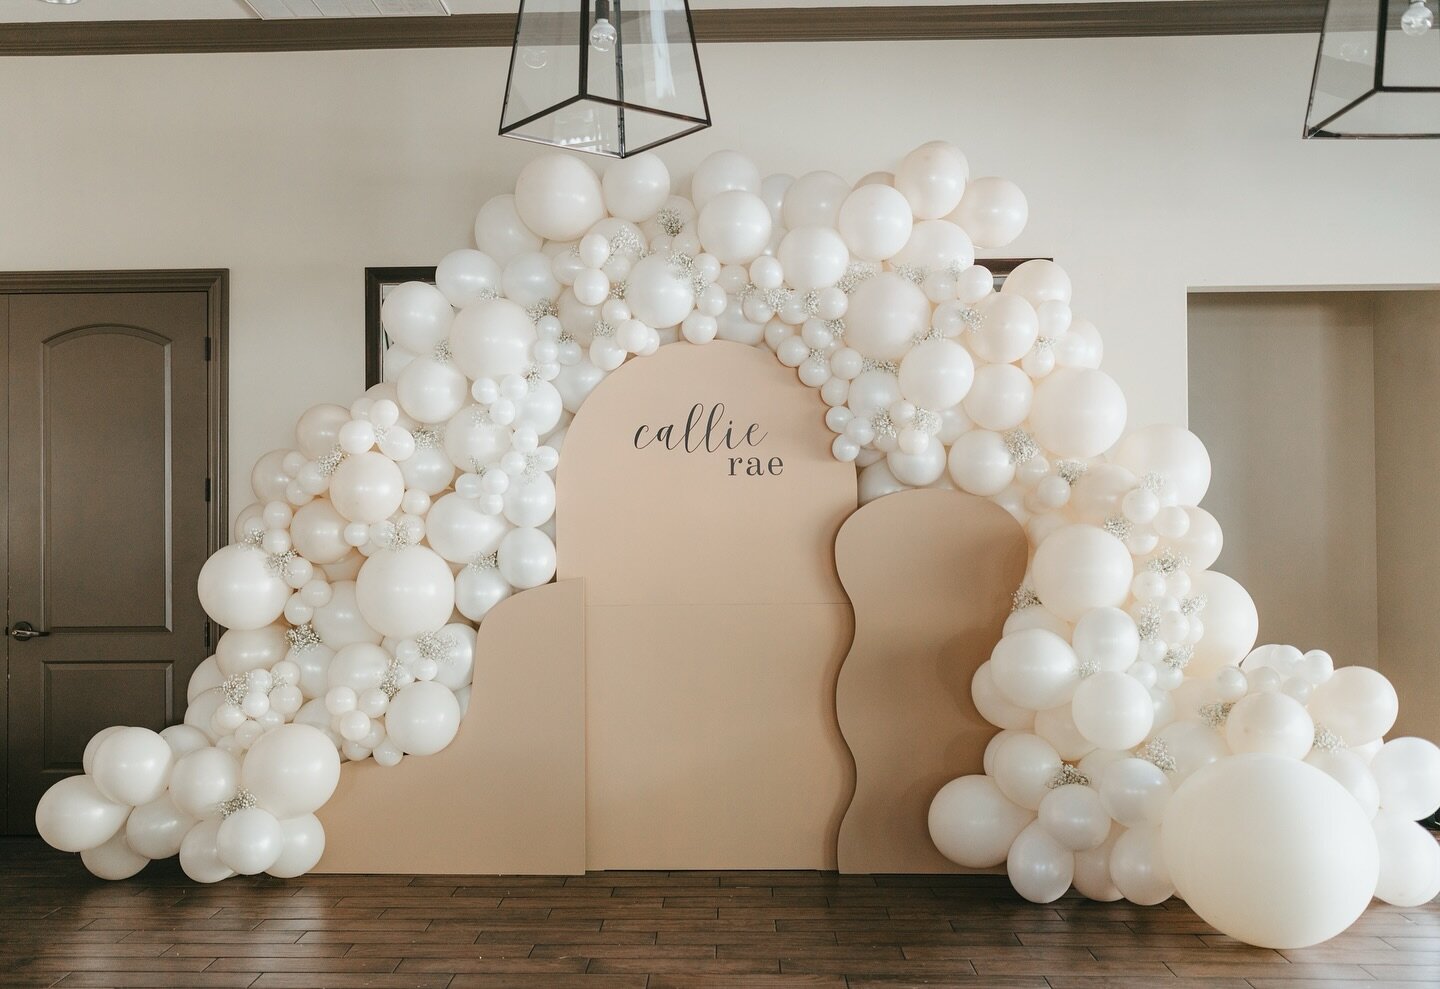 This install 🤩🤩🤩 so in love with this design and setup. Can&rsquo;t wait to share more from this sweet baby shower ☁️ 🤍

Happy baby shower Char + Ray

Vendor LOVE:
.
.
.
Backdrop: @rentals_blushandbloom
Balloons: @jazmin_blushandbloom
Bartending: